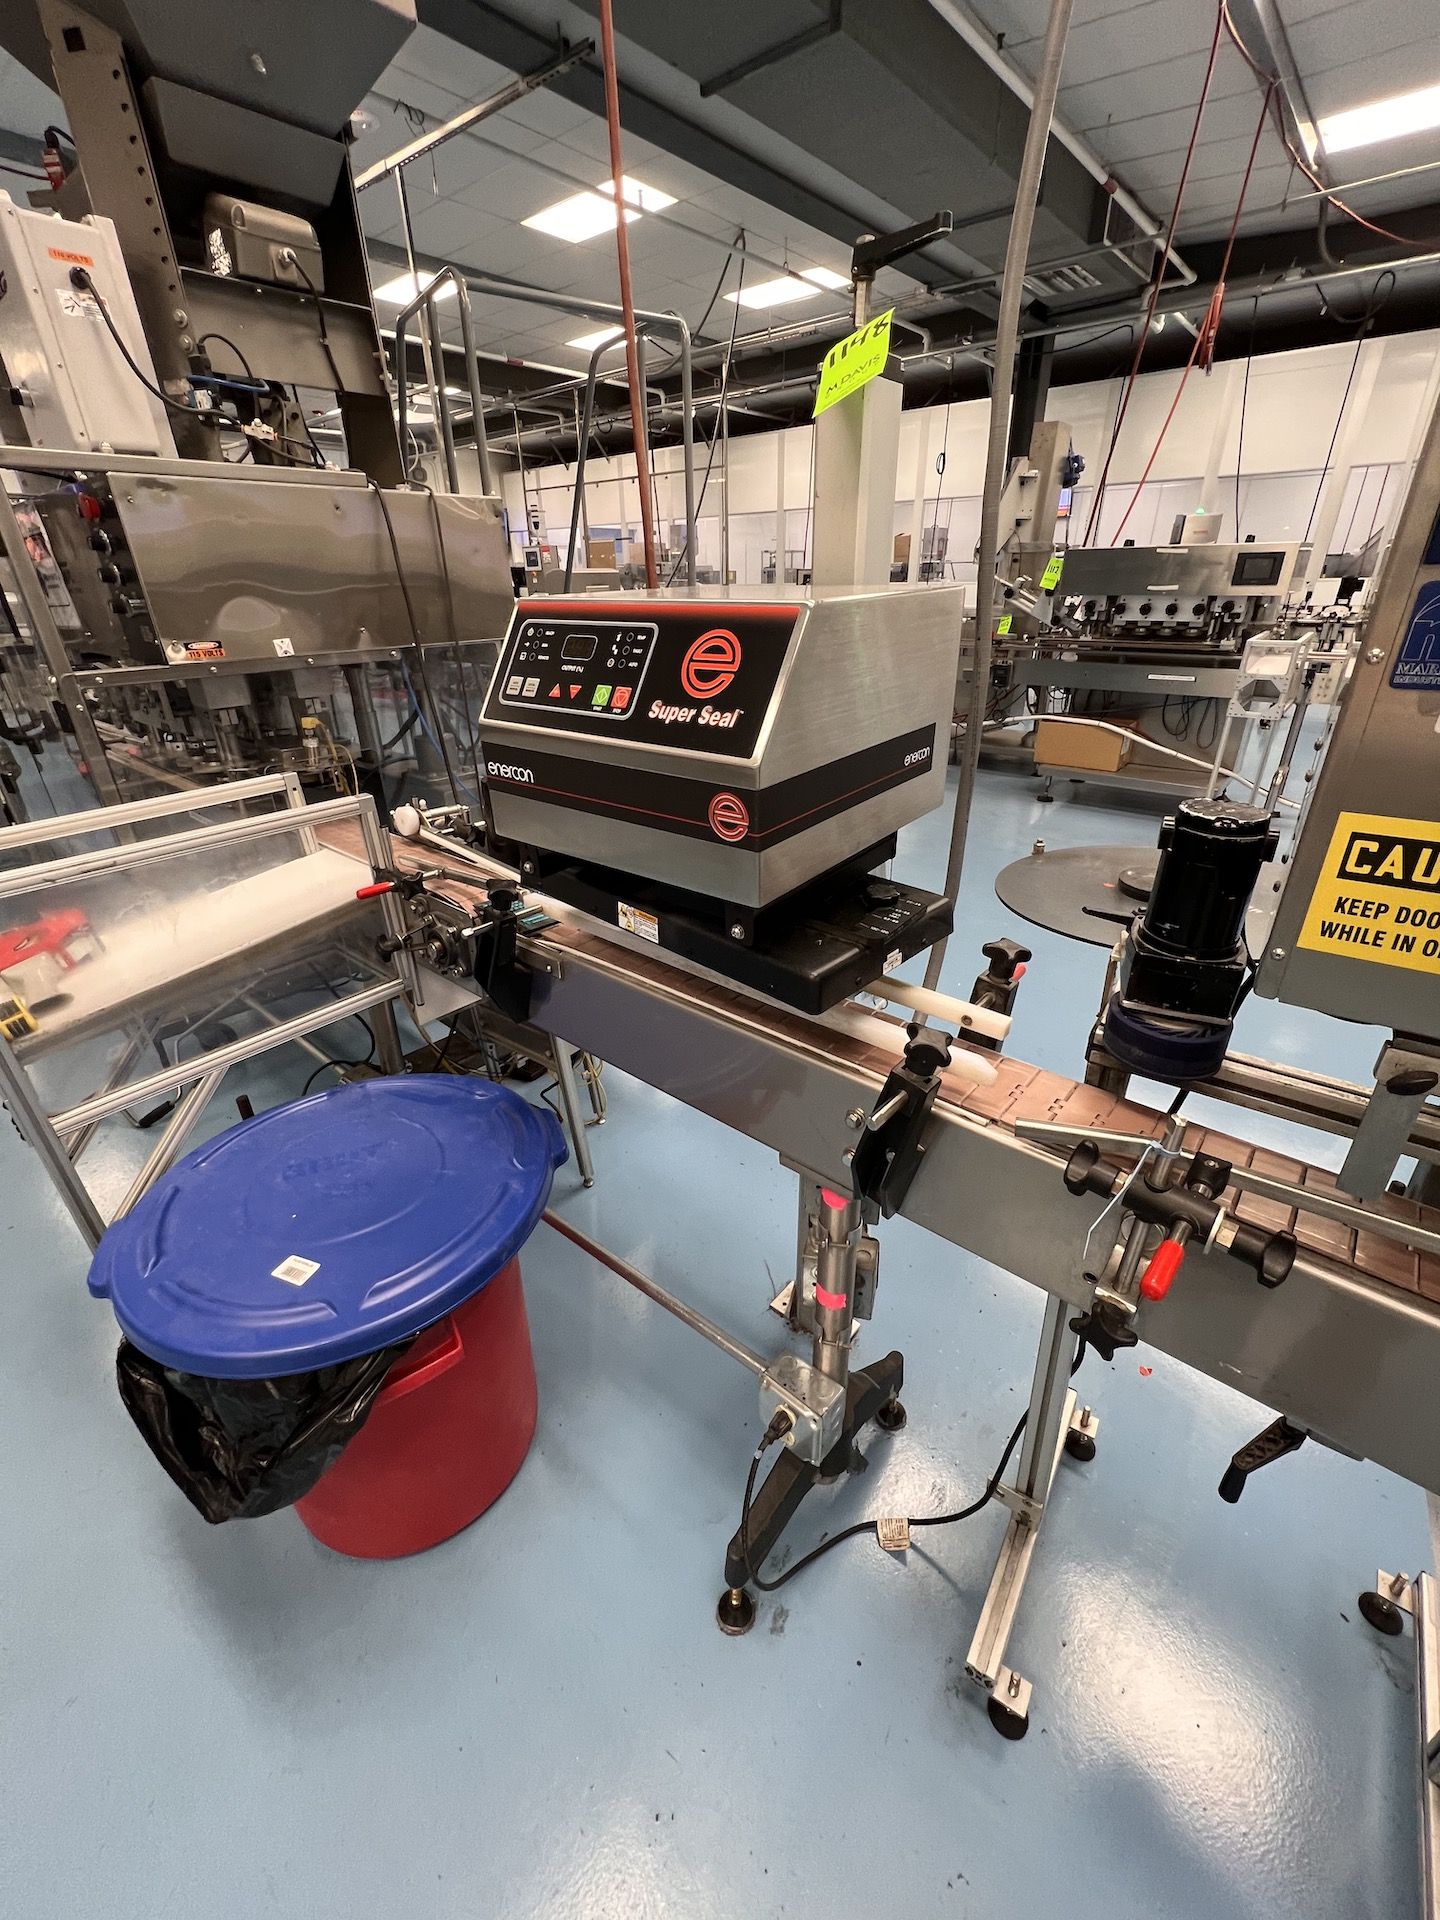 2019 ENERCON SUPERSEAL 100 INDUCTION SEALER, MODEL LM5022-222, S/N 151399-1-1, 240/3/50/60 - Image 5 of 7